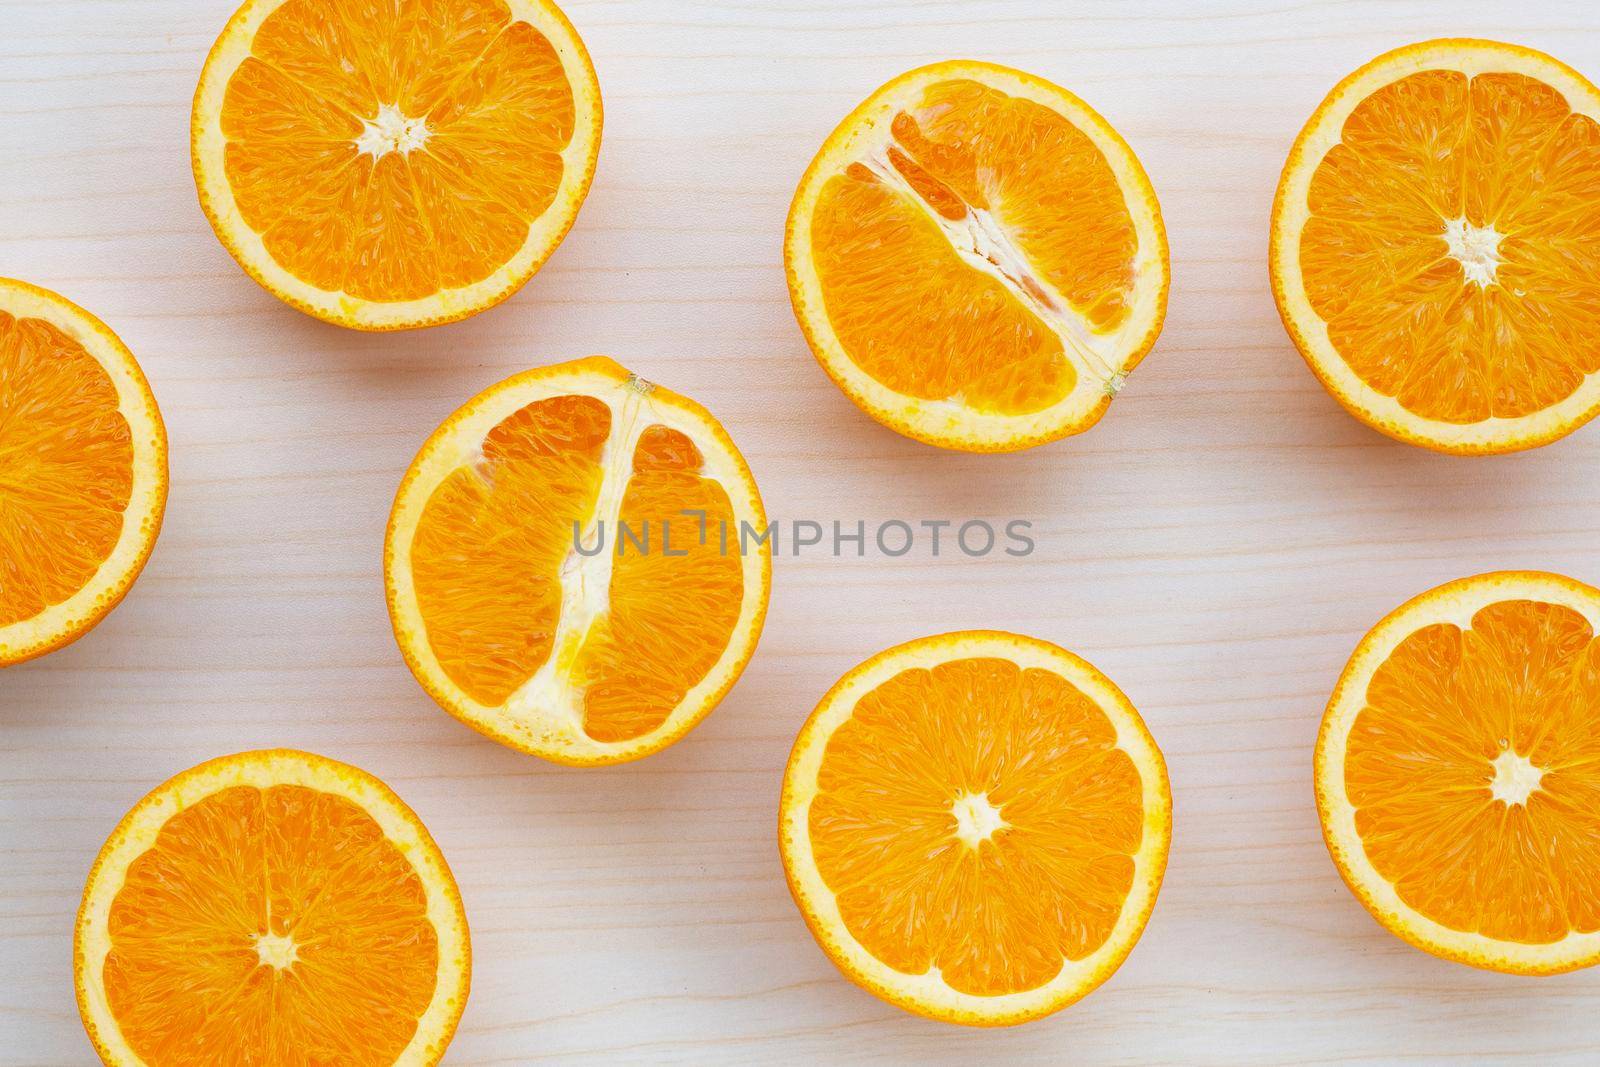 High vitamin C, Juicy and sweet. Fresh orange fruit on wooden texture background.